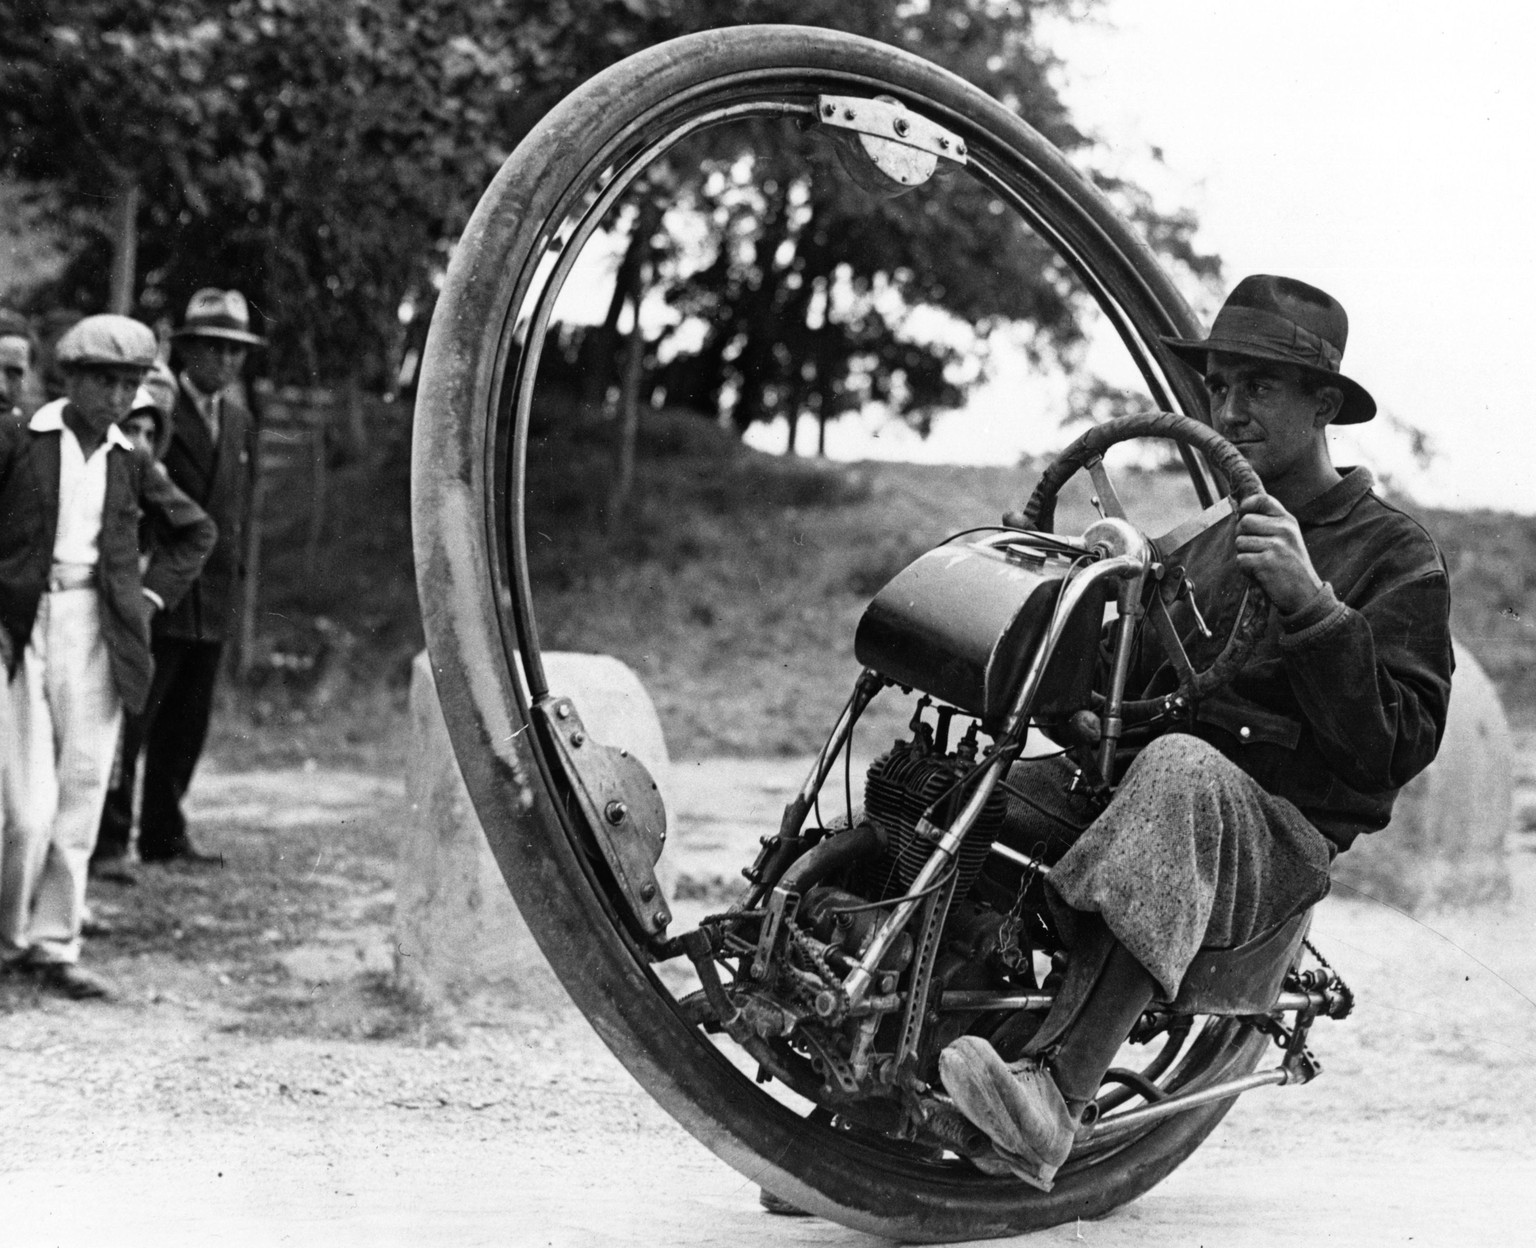 1st September 1931: Swiss engineer M Gerder at Arles, France on his way to Spain in his 'Motorwheel', a motorcycle with a wheel which runs on a rail placed inside a solid rubber tyre. http://avax.news ...